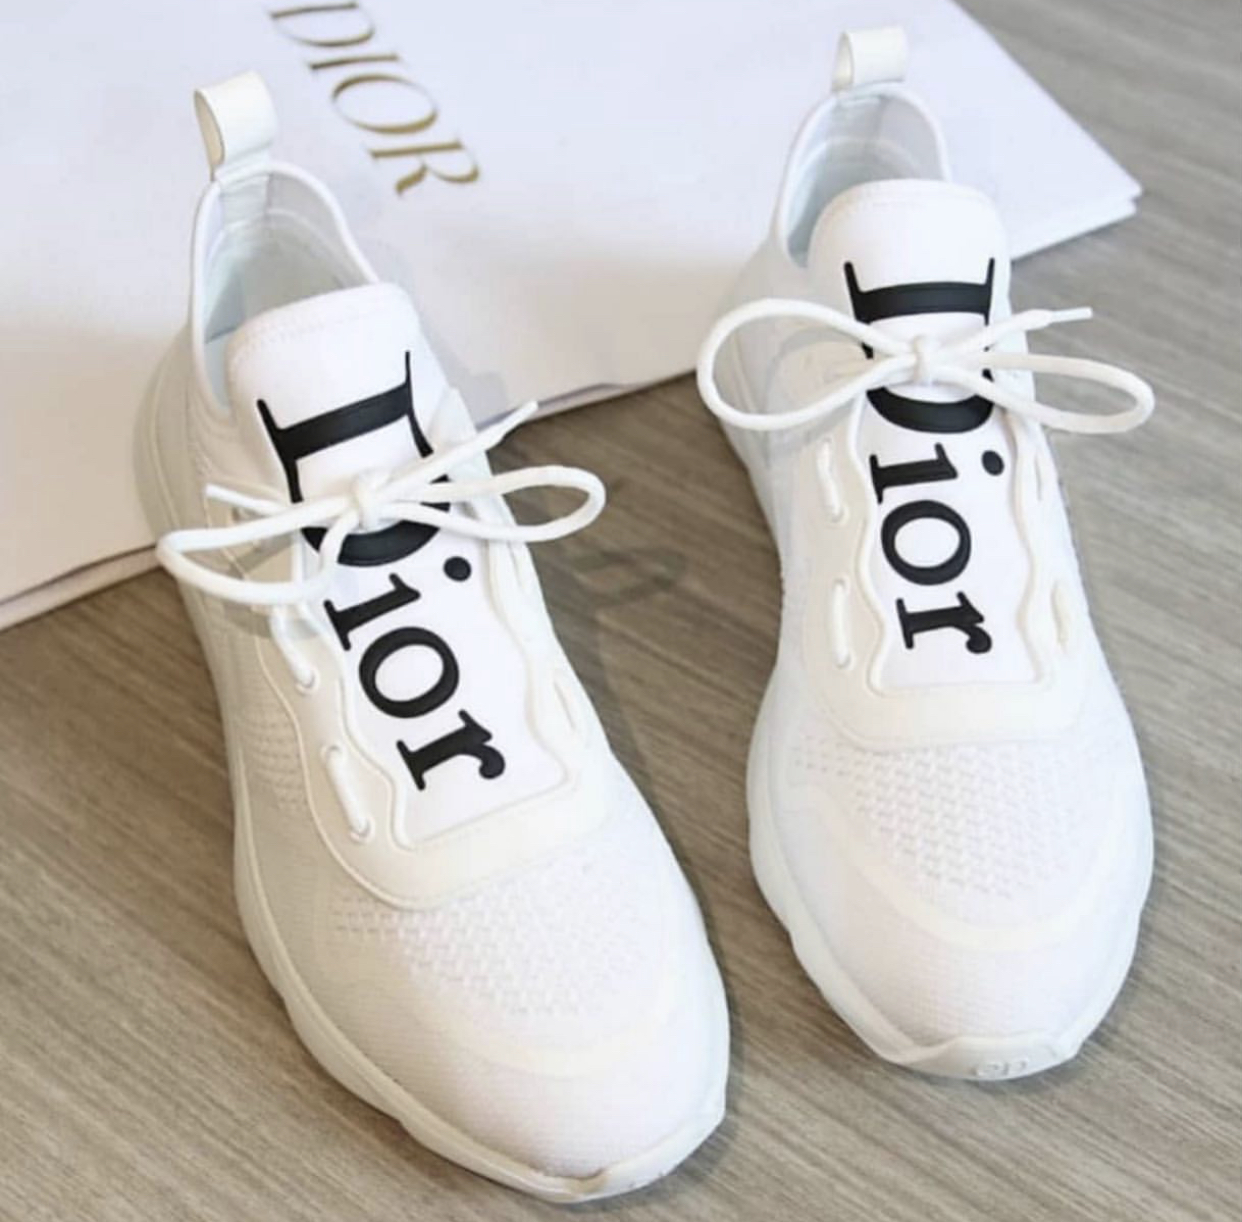 Dior Sneakers Men's Collection Price 